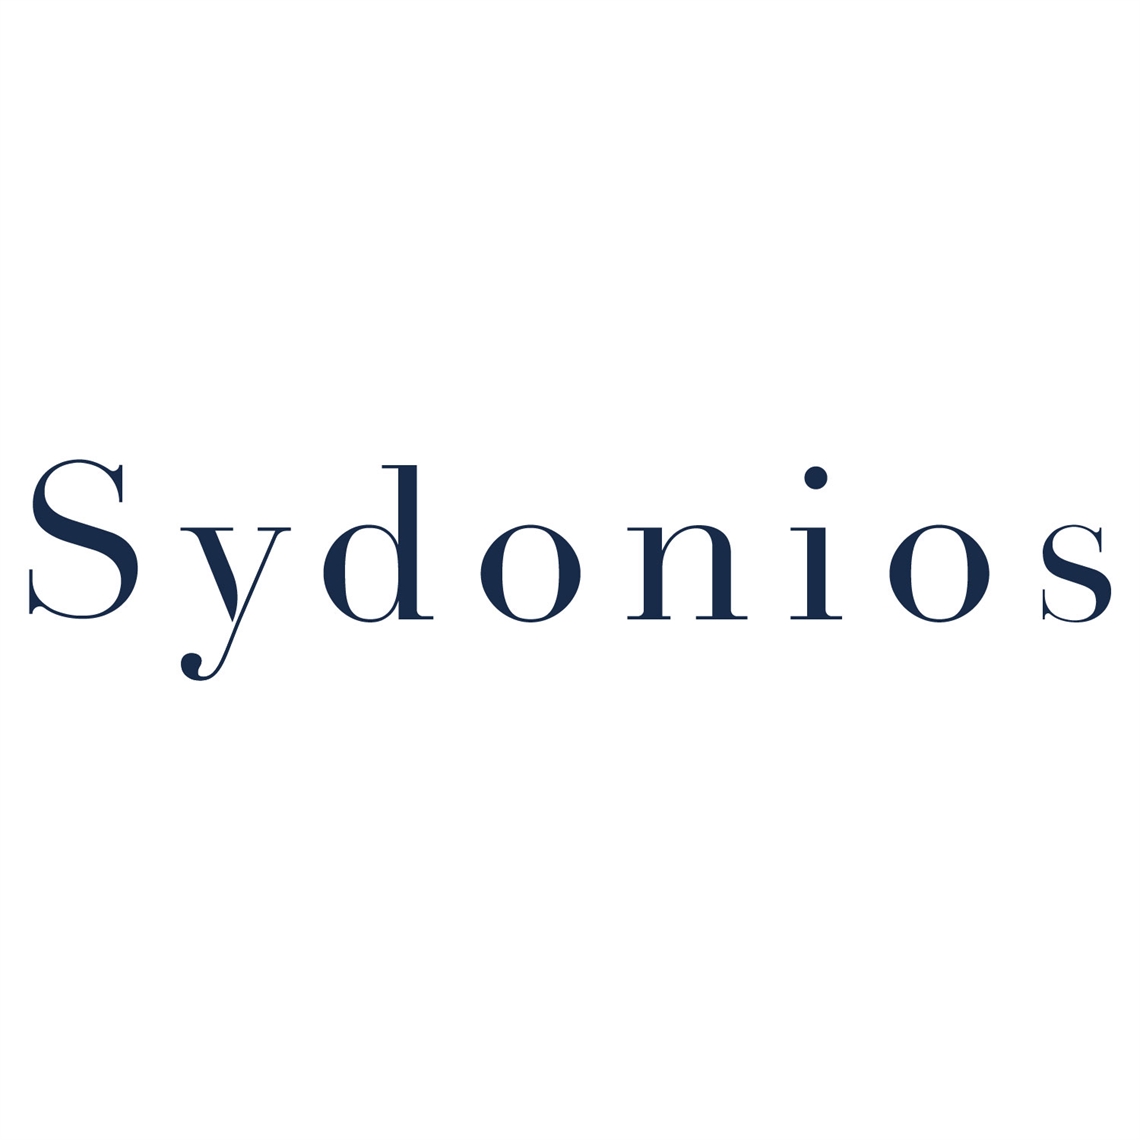 View our collection of Sydonios Stemmed vs. Stemless wine glasses